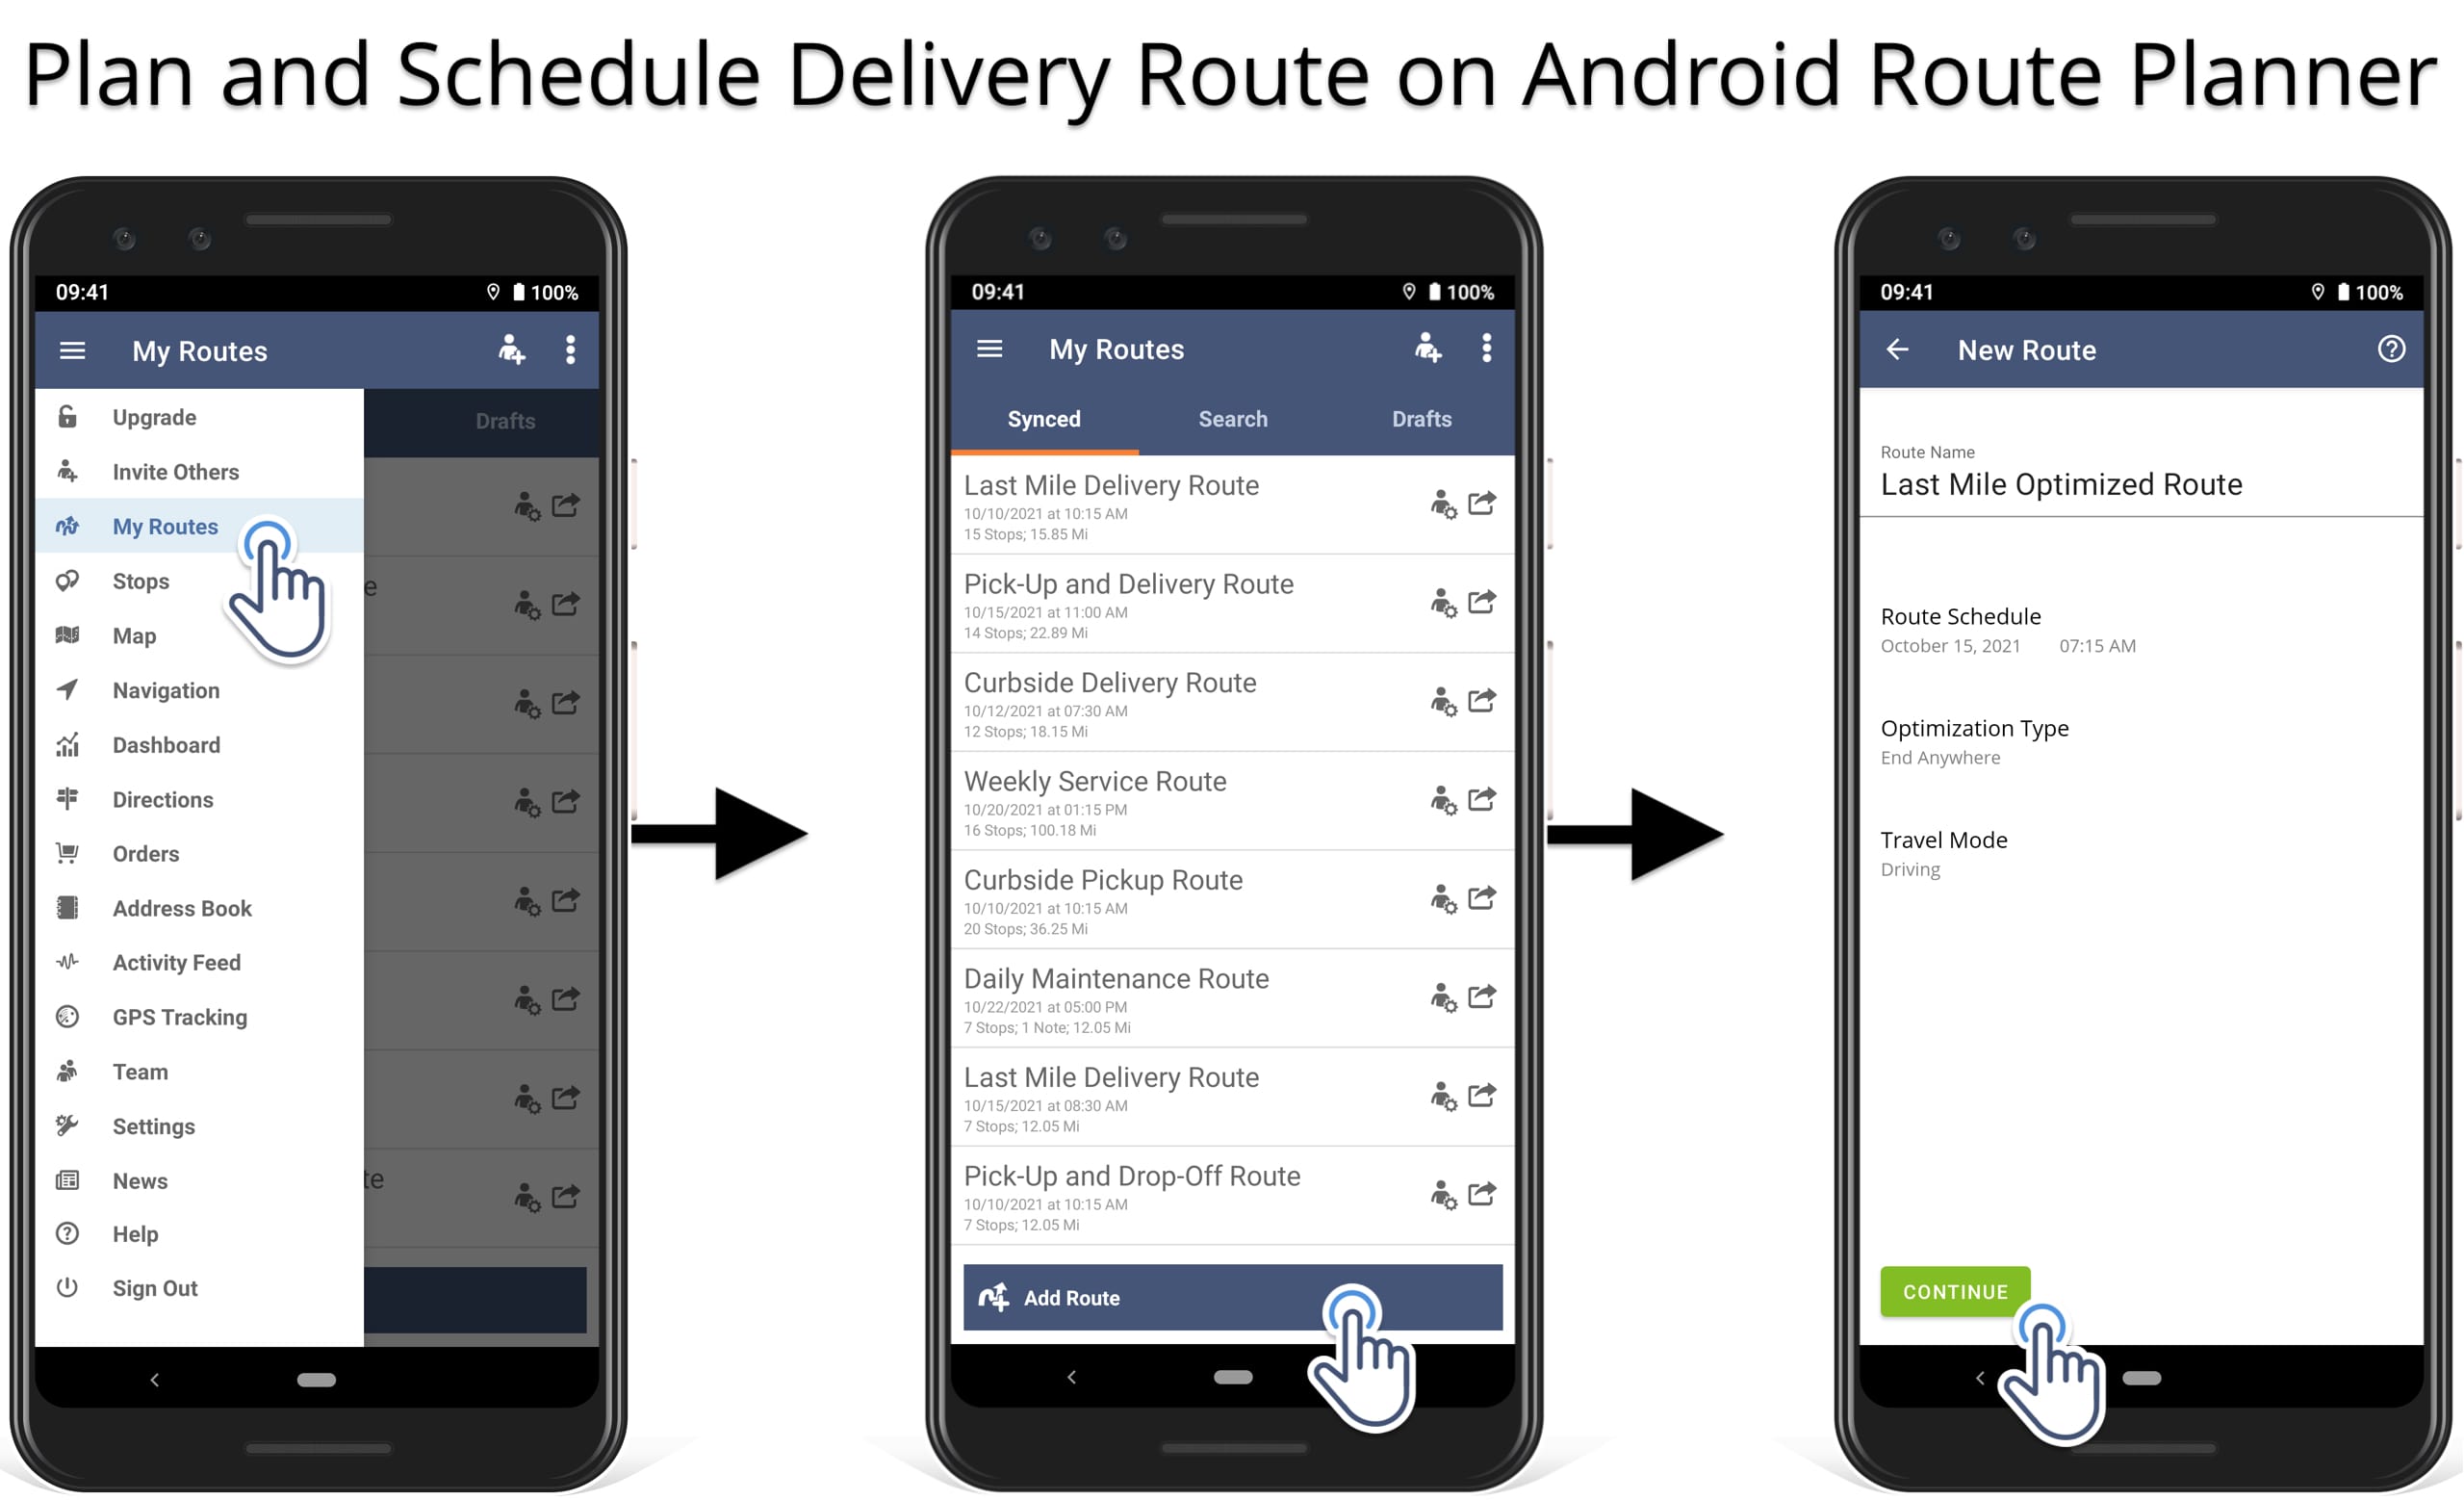 Plan and schedule a delivery route on the mobile route planner app for Android smartphones.